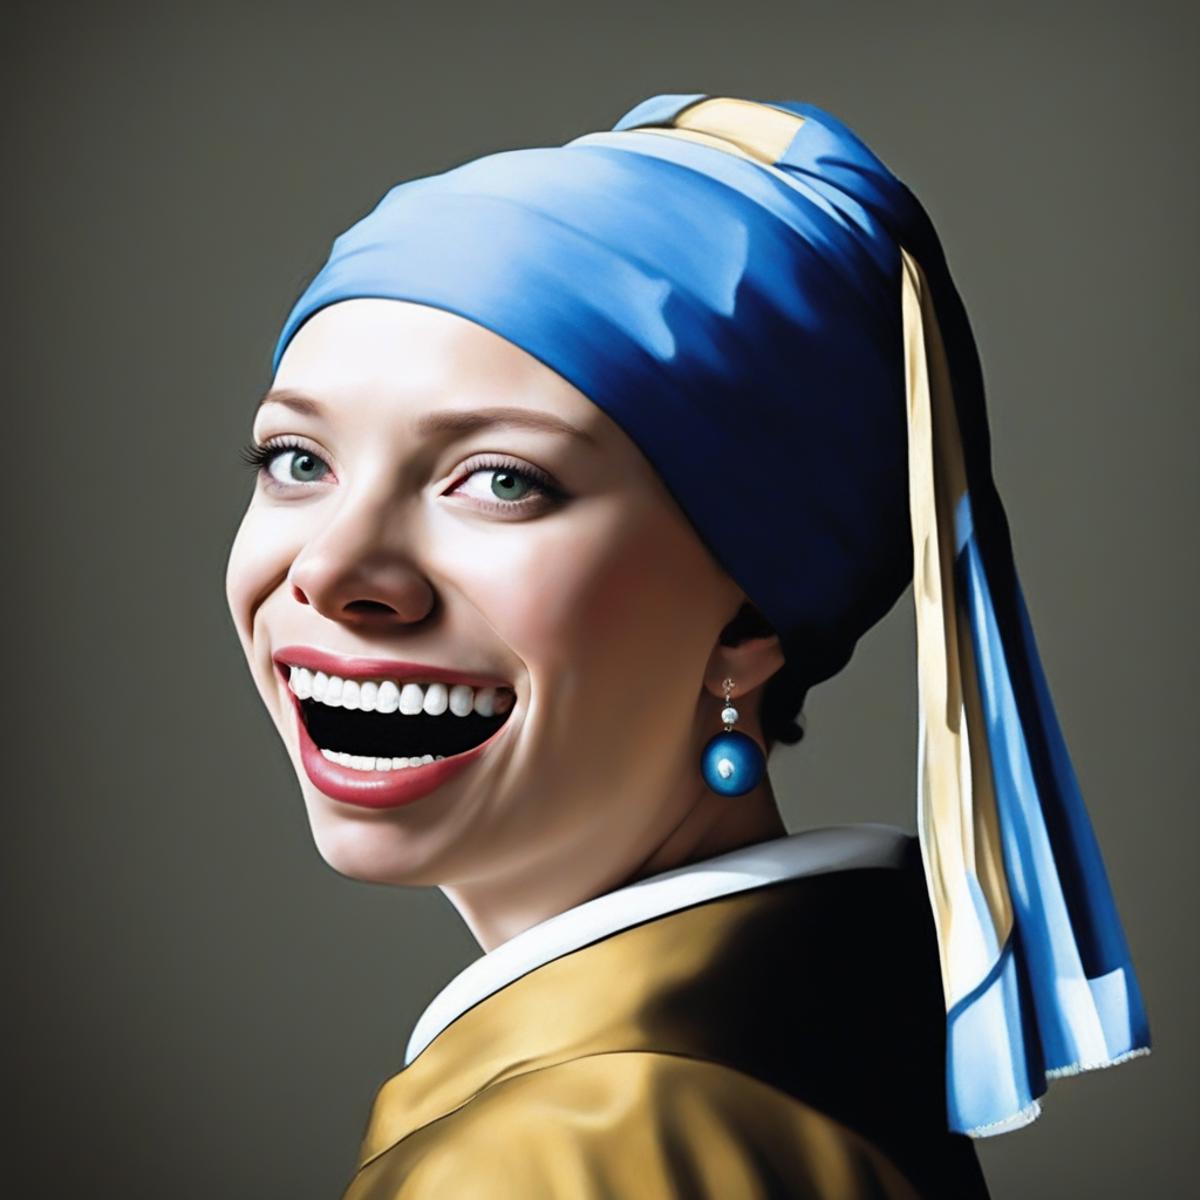 A woman wearing a blue headscarf and a yellow jacket is smiling.